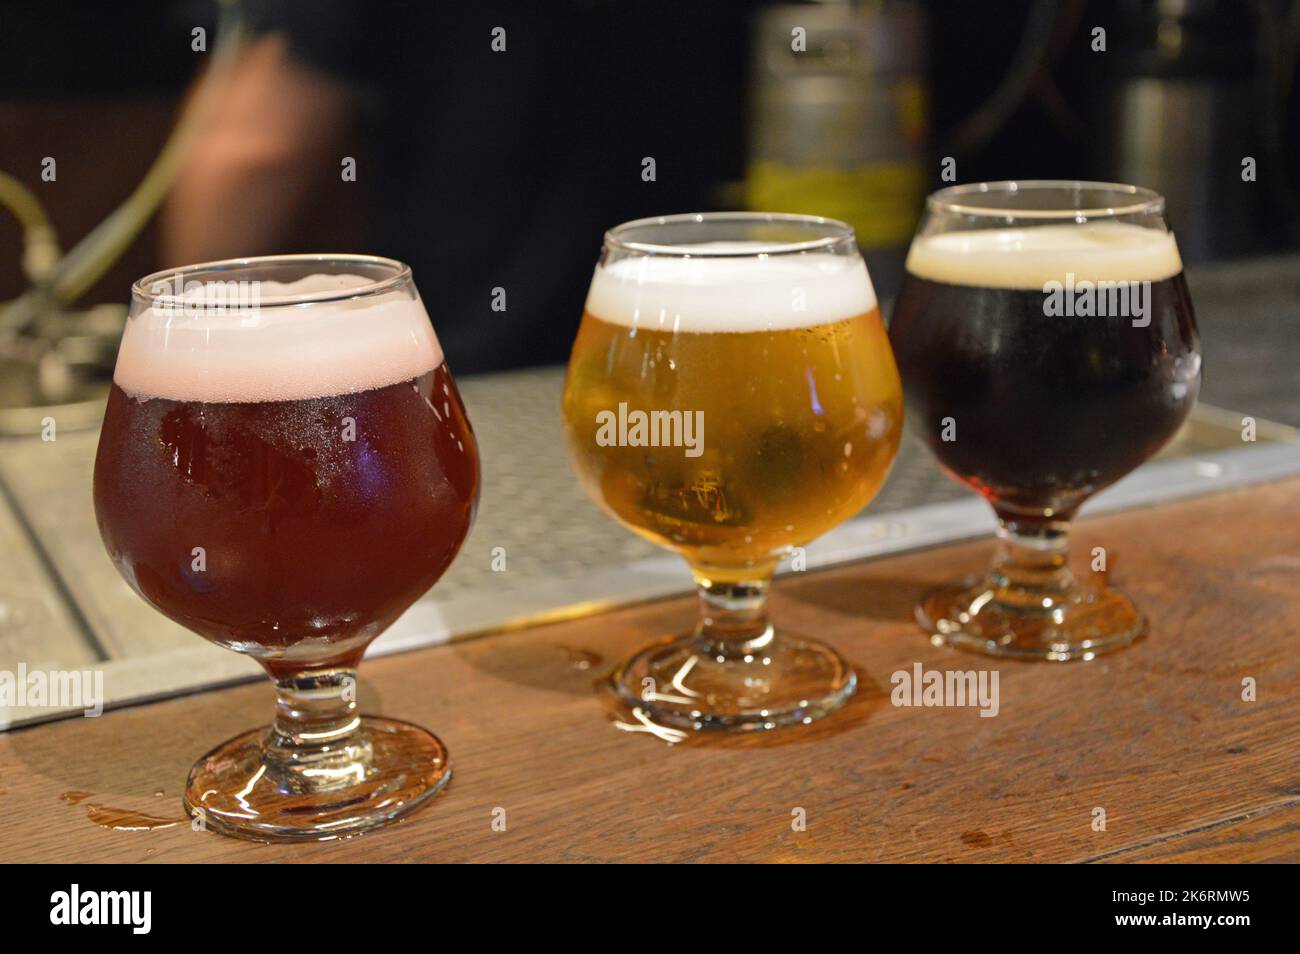 Glasses of beer on a bar Stock Photo